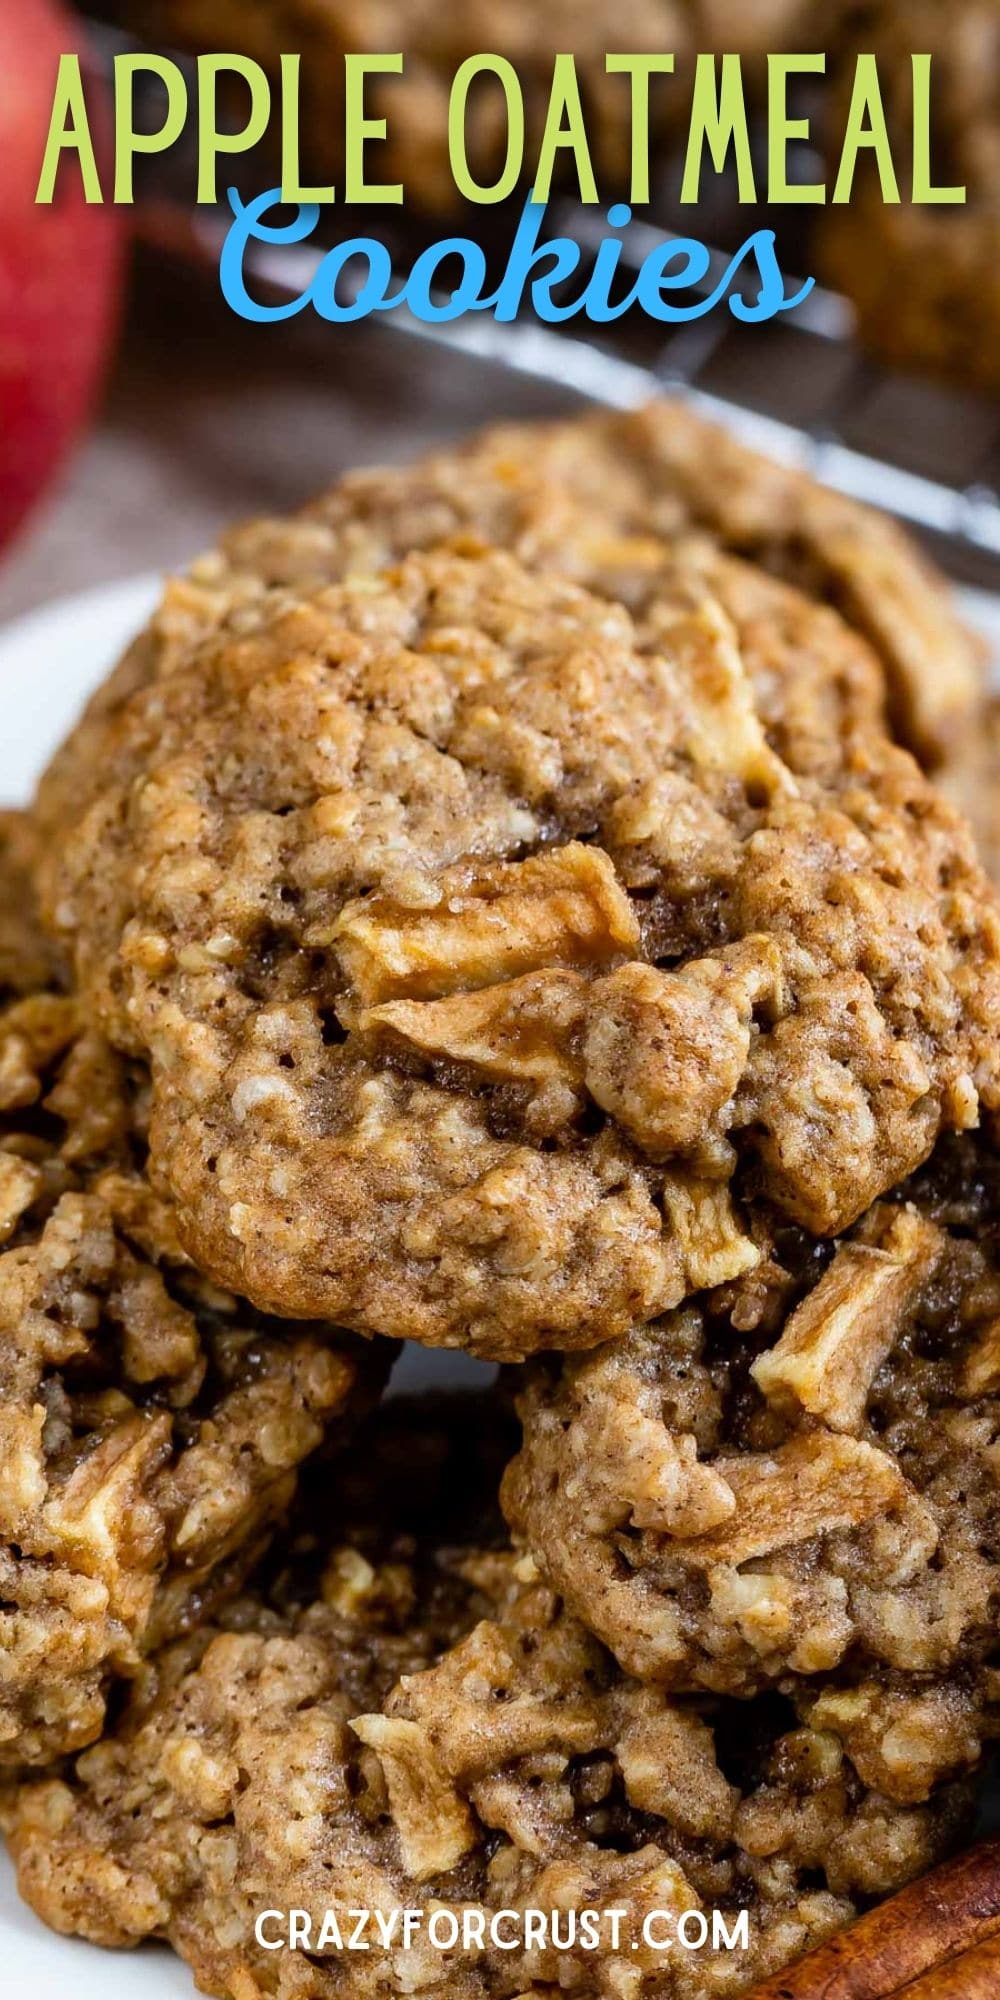 Group of apple oatmeal cookies with recipe title on top of image